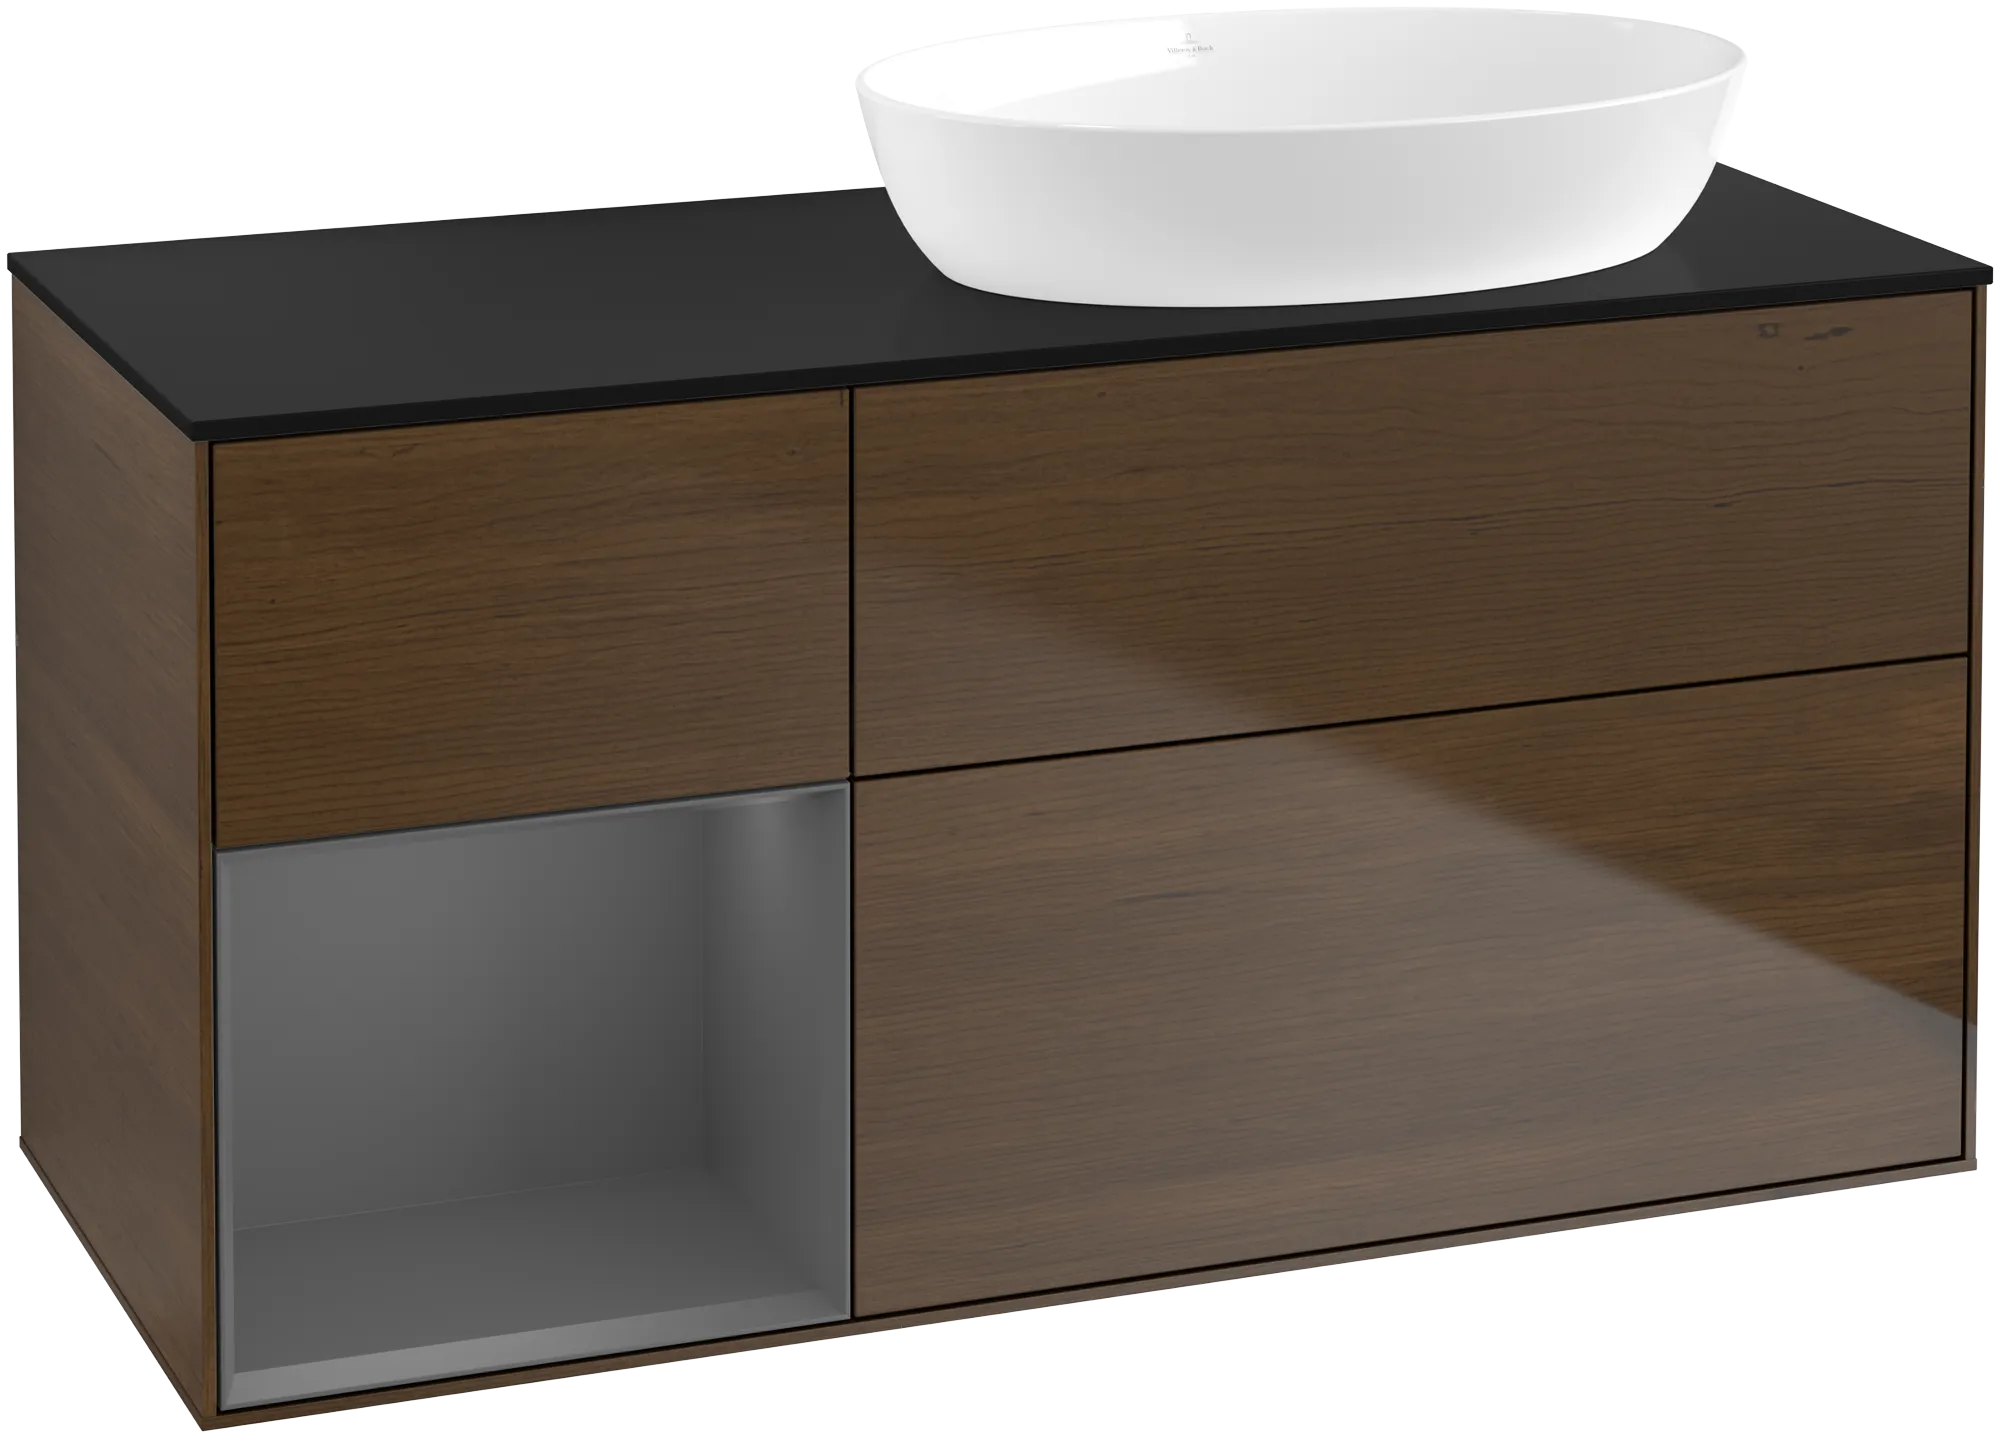 Picture of VILLEROY BOCH Finion Vanity unit, with lighting, 3 pull-out compartments, 1200 x 603 x 501 mm, Walnut Veneer / Anthracite Matt Lacquer / Glass Black Matt #GA42GKGN